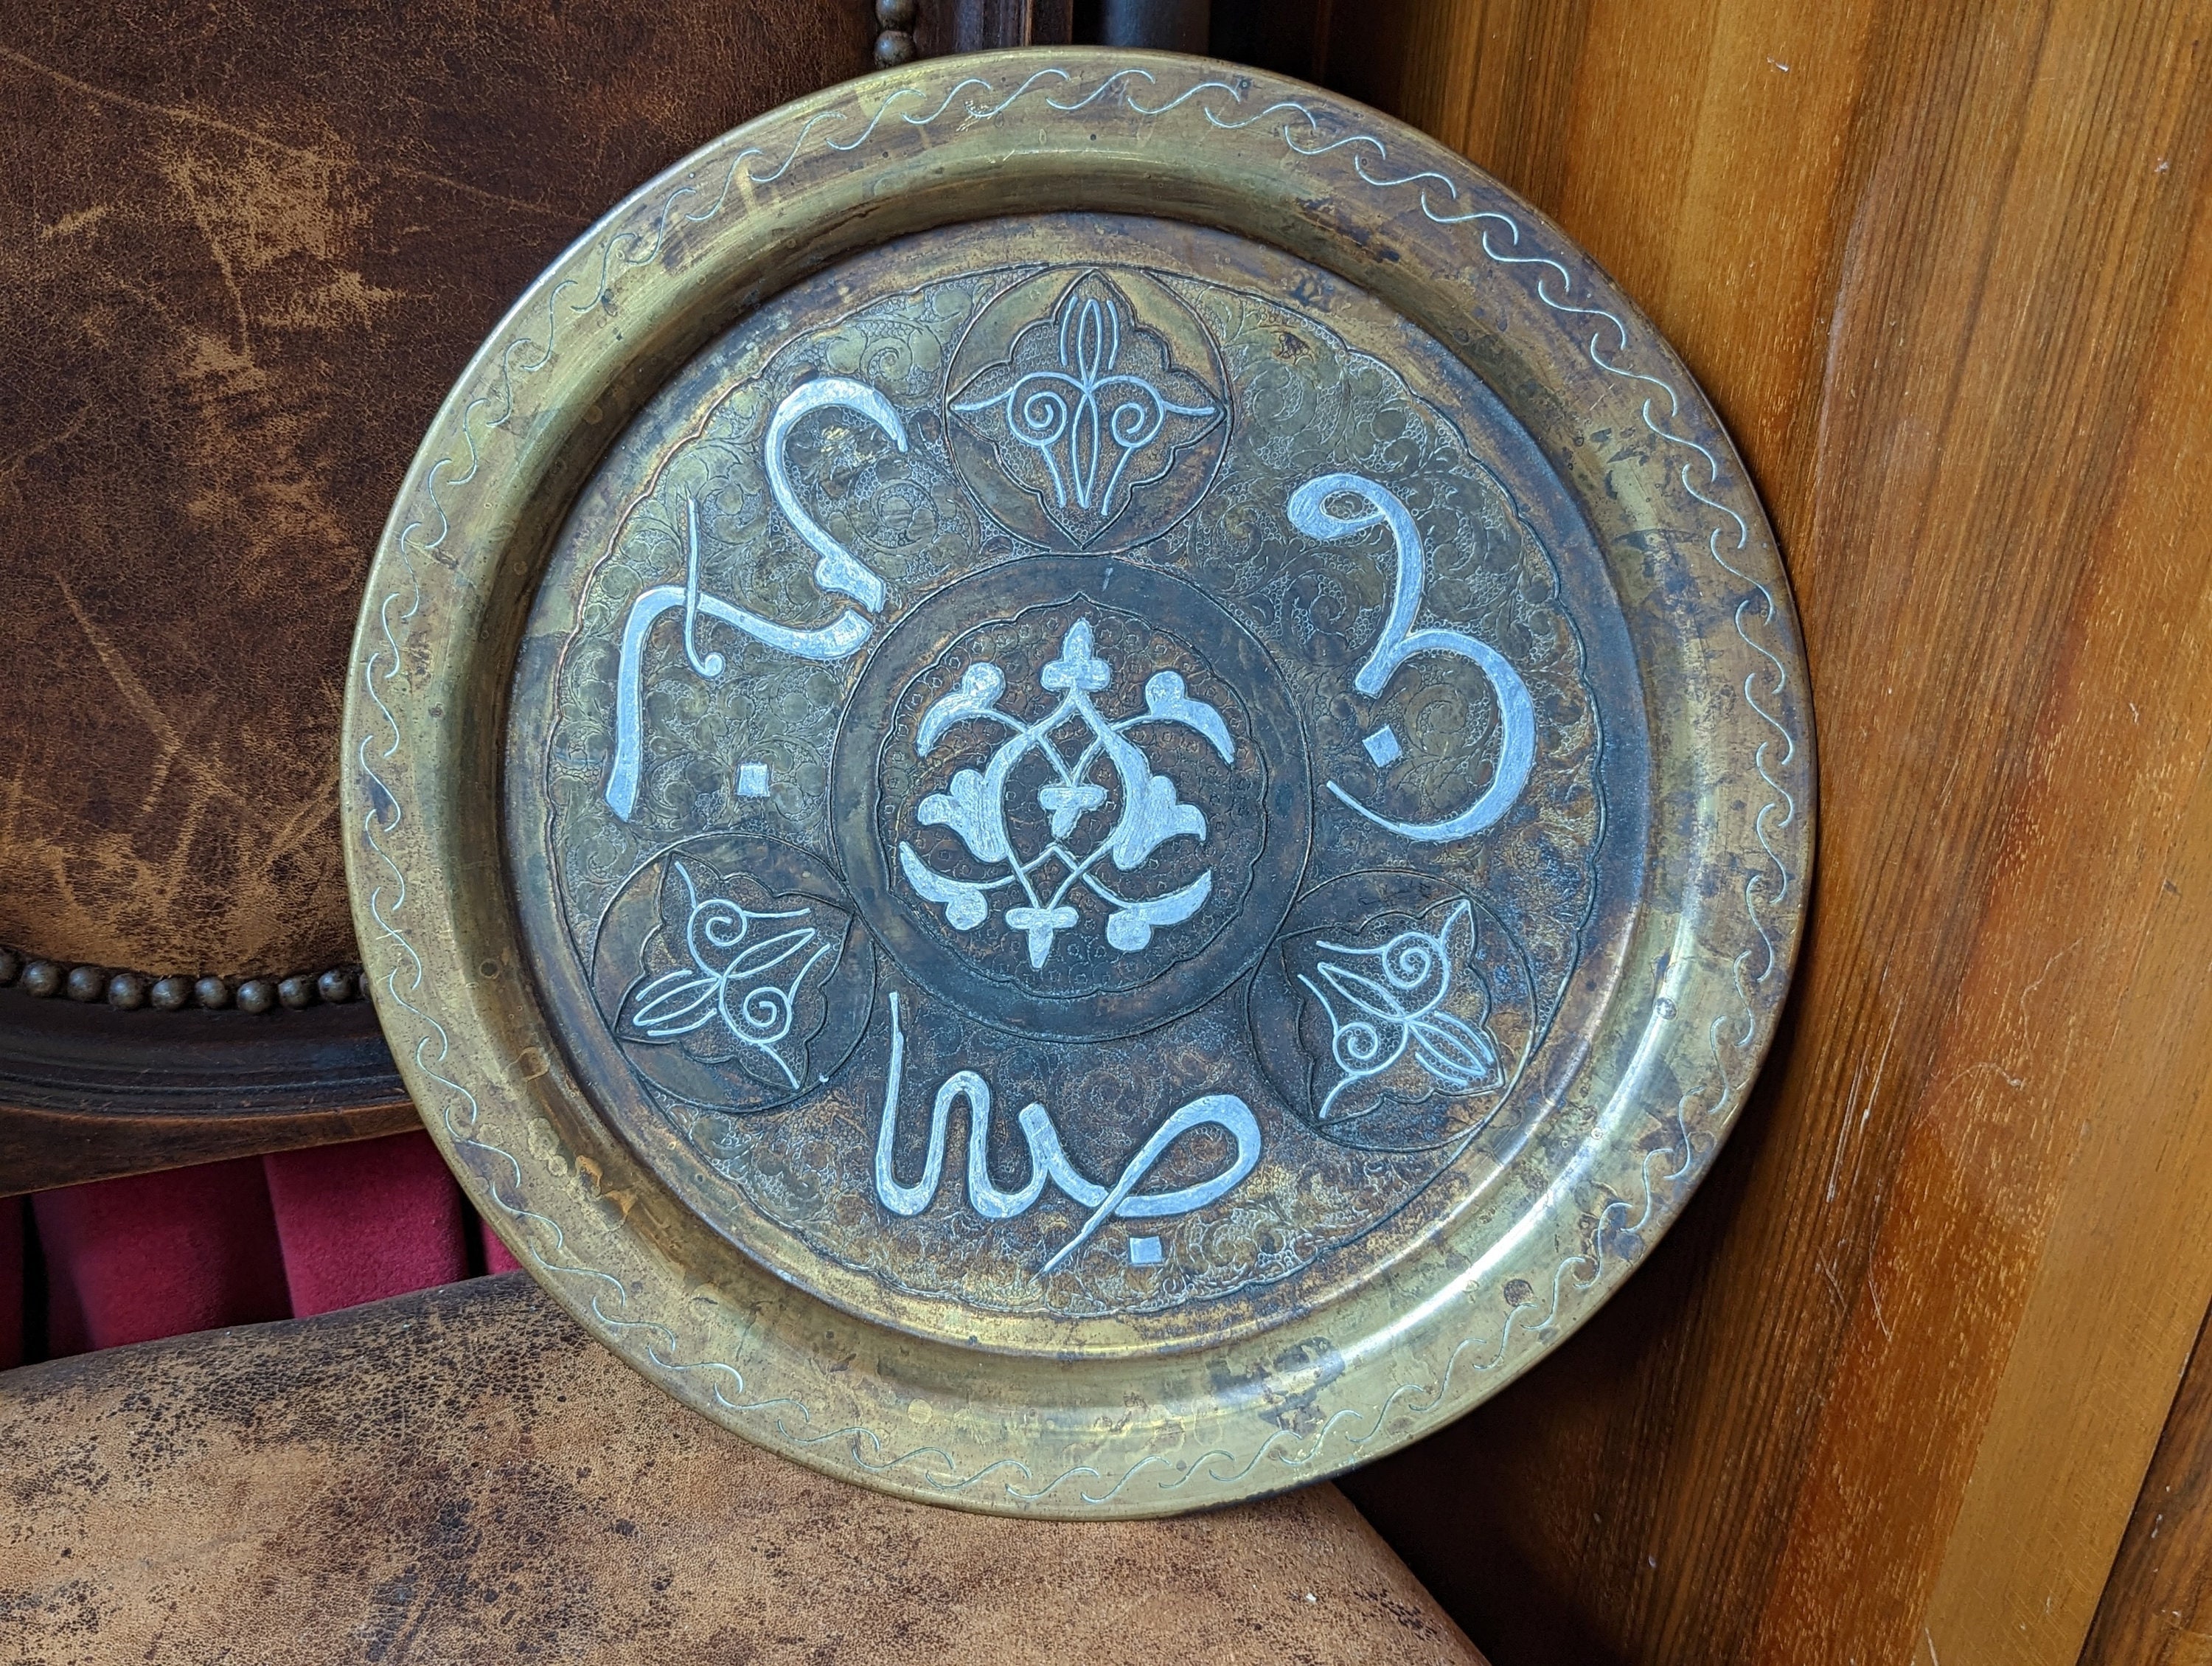 Islamic Wan Yakad Handcrafted Engraved Decorative Copper Plate